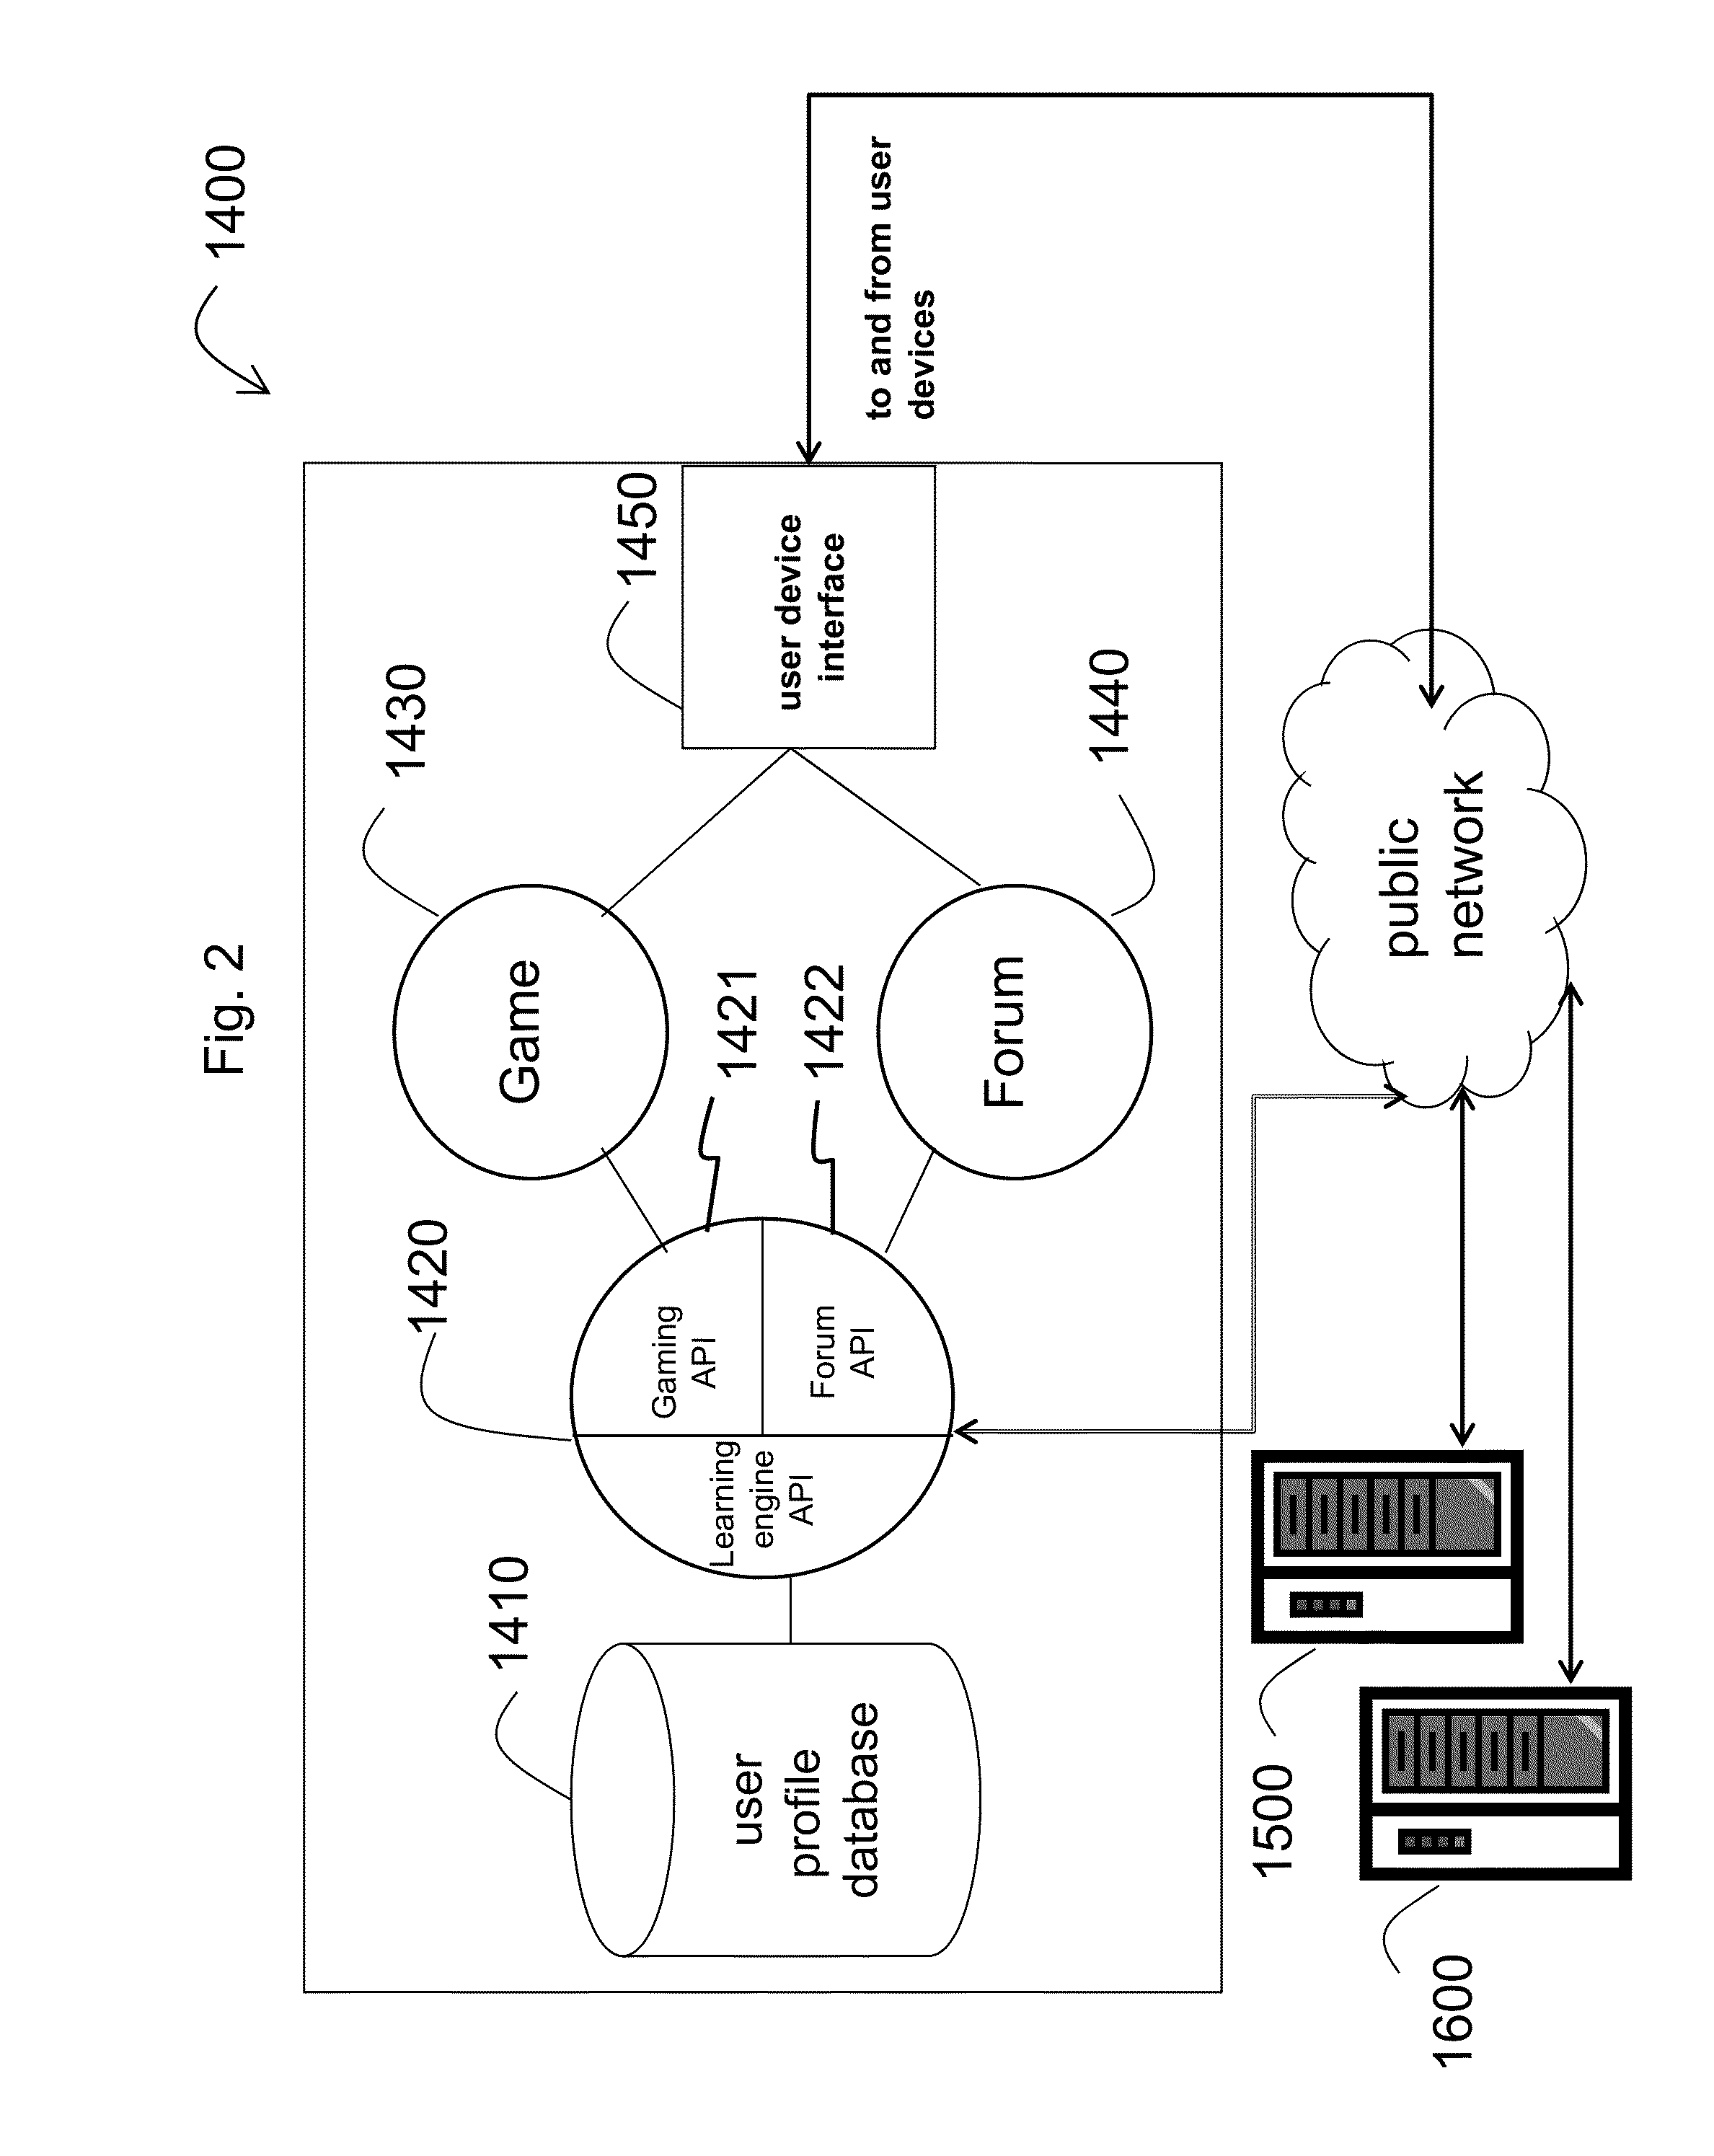 Systems and methods for online learning in a combined game and forum setting